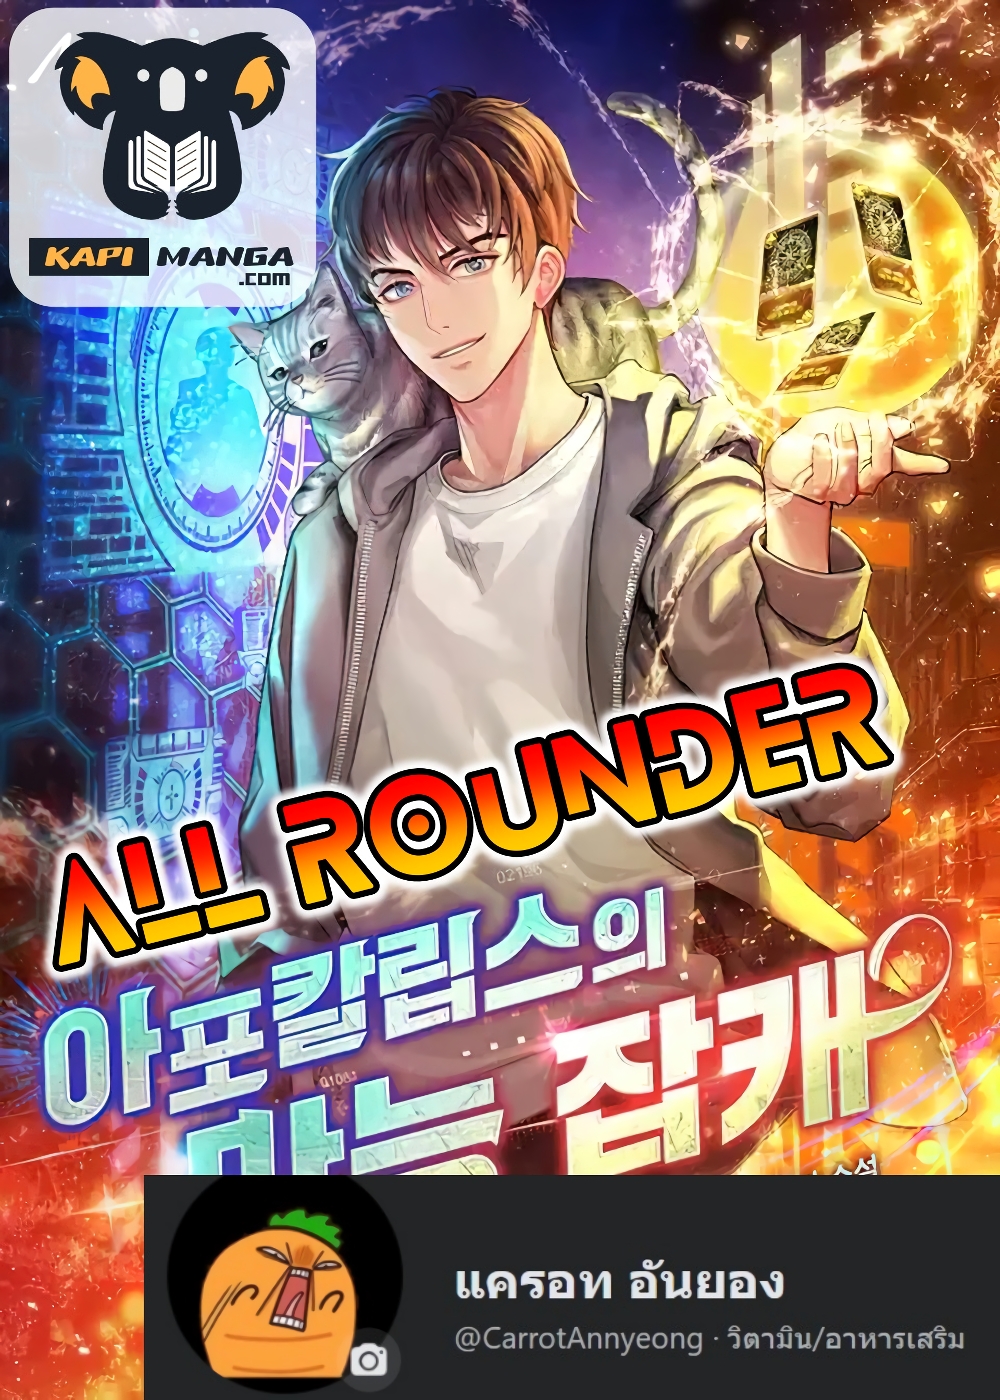 All Rounder10 (1)